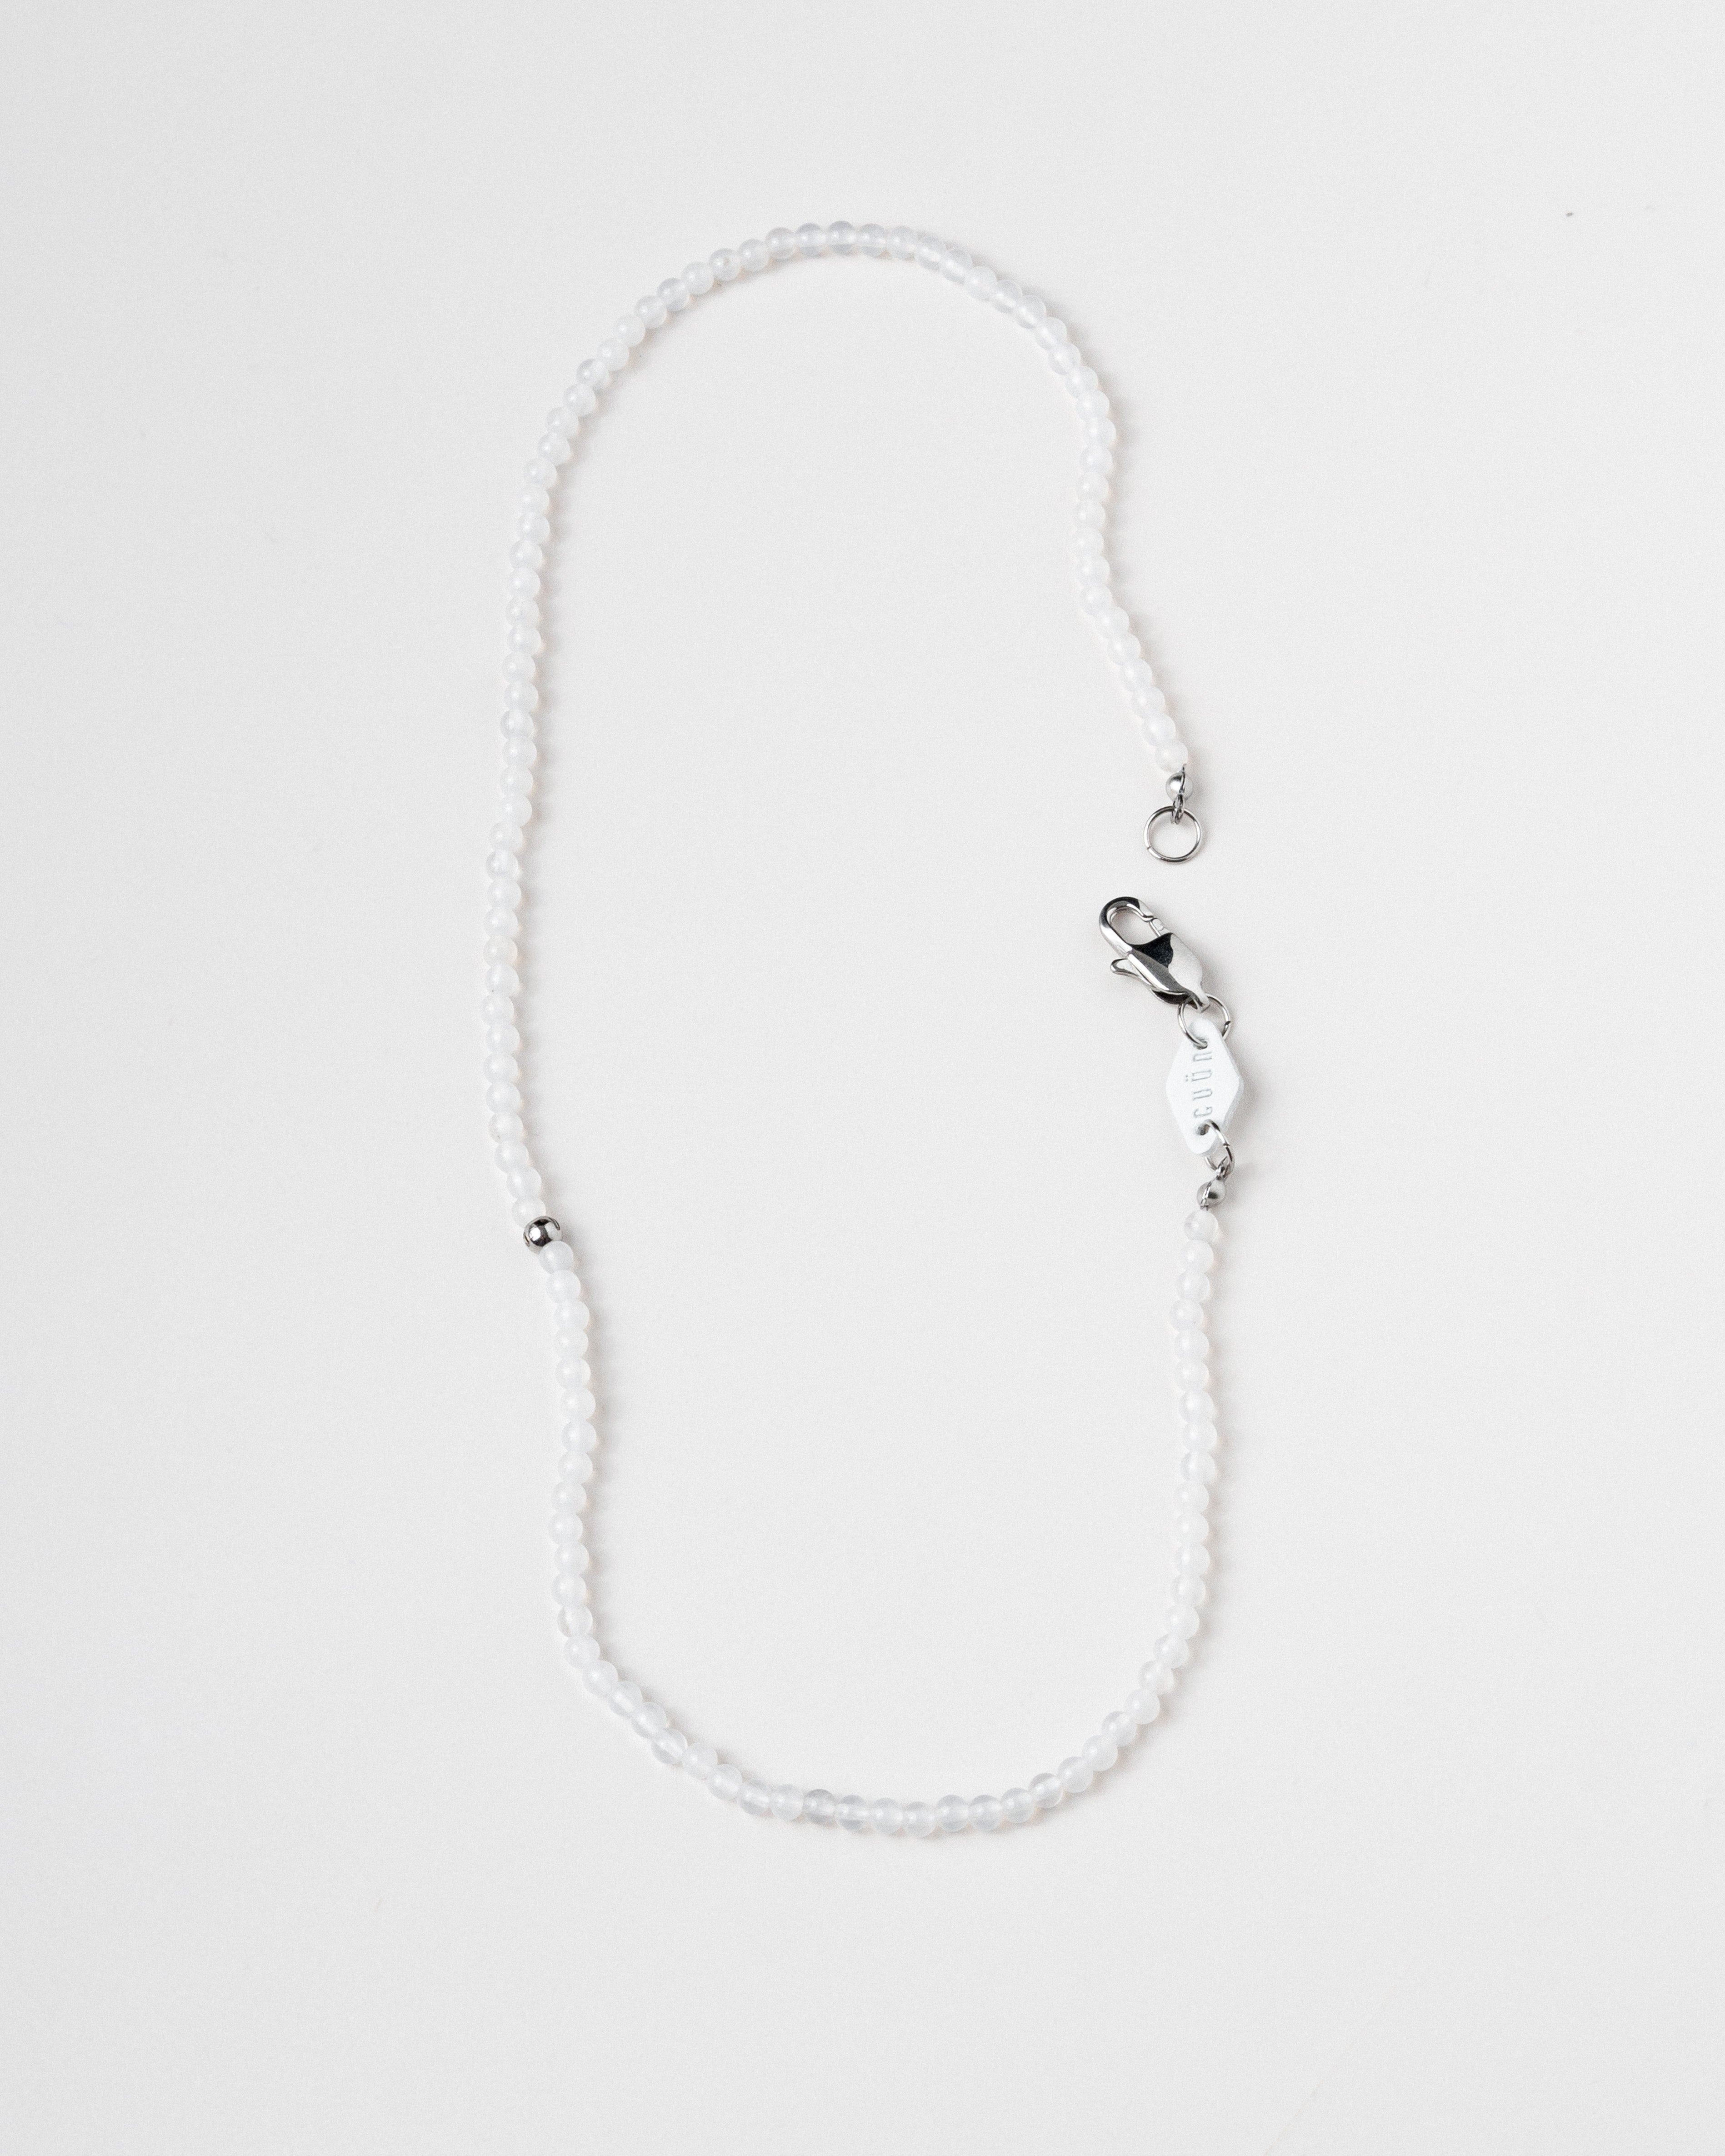 Joon Petite White Agate Beaded Necklace